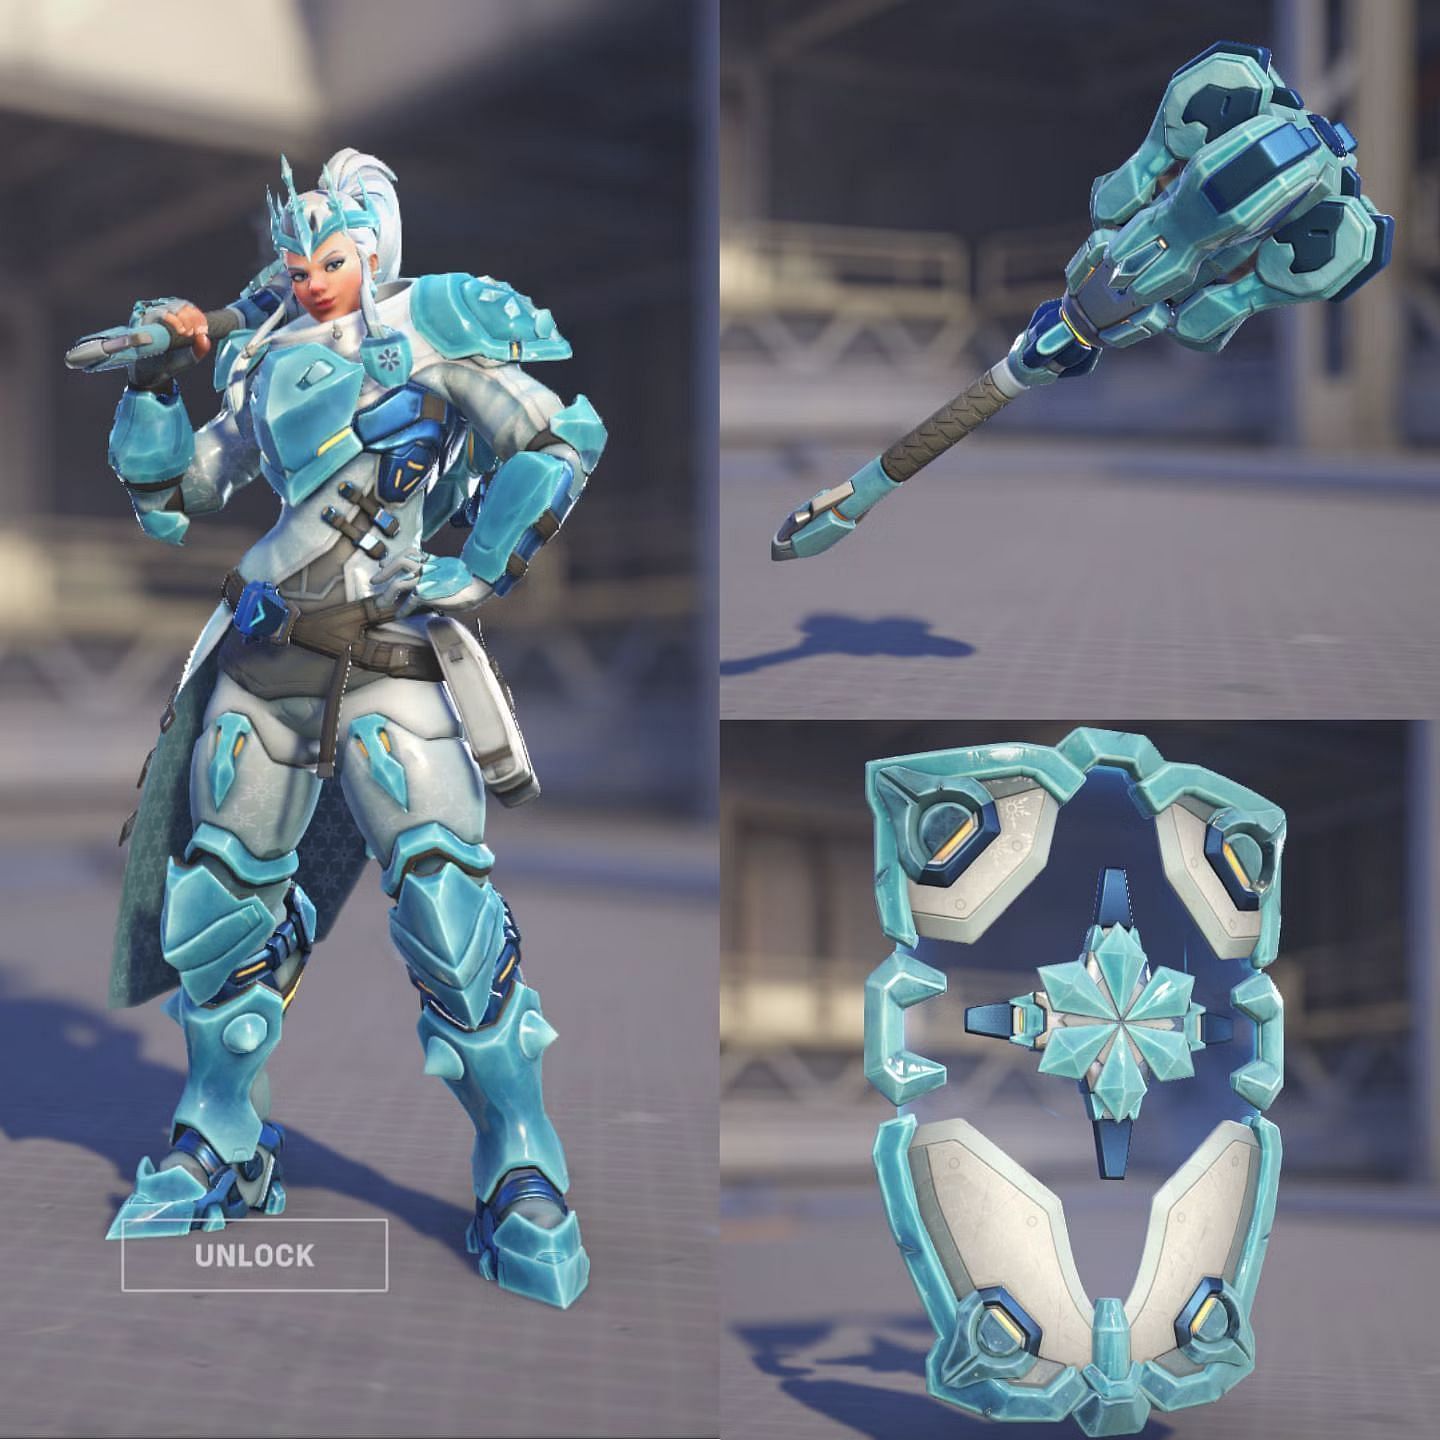 Epic Ice Queen Brigitte skin with her weapon and shield (Image via Blizzard Entertainment)